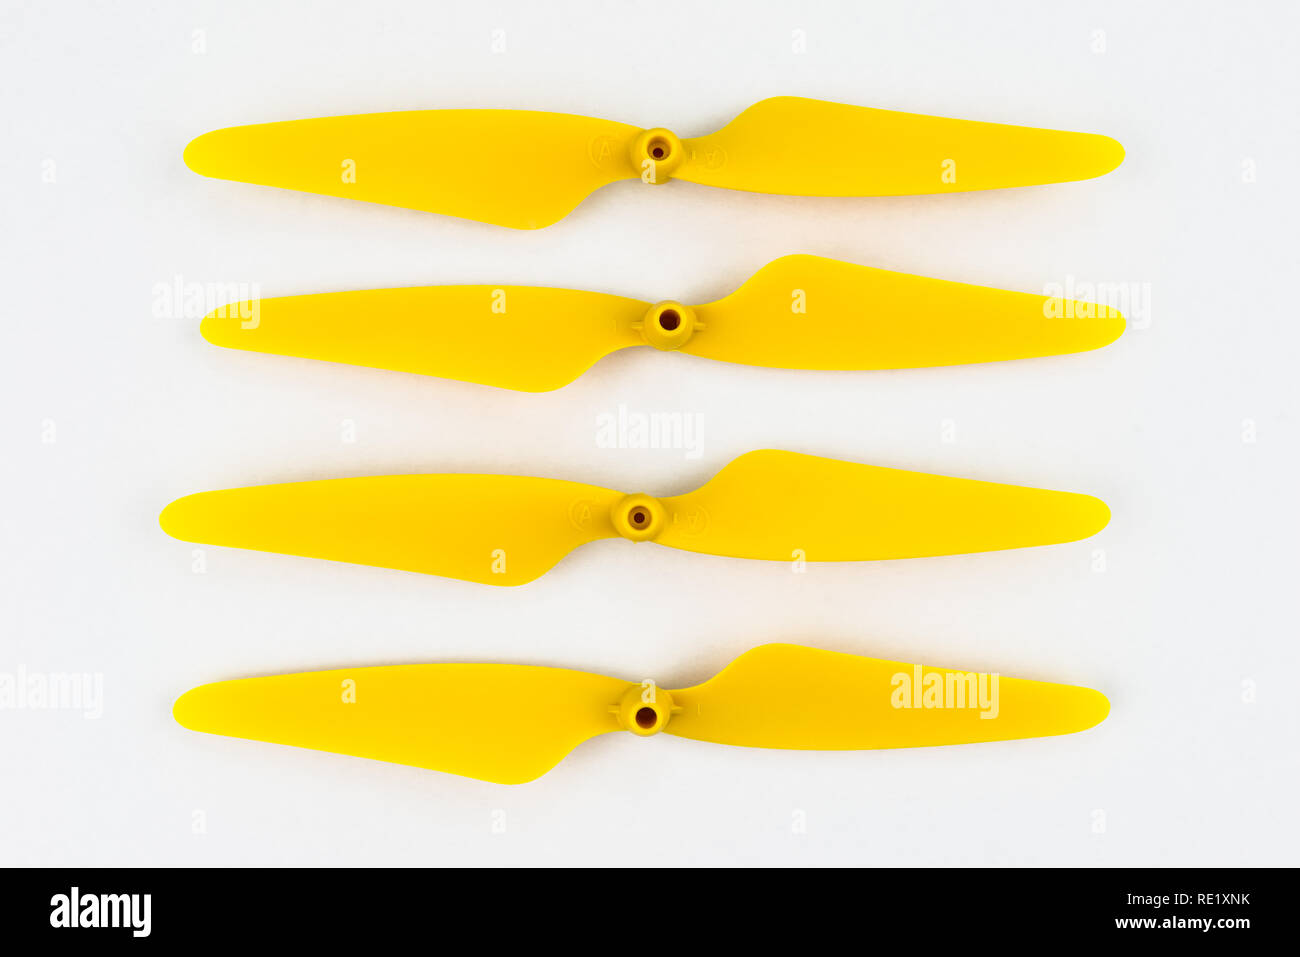 Yellow, plastic propellers for a quadcopter drone, isolated on white background with clipping path. Four pieces arranged in a row. Stock Photo